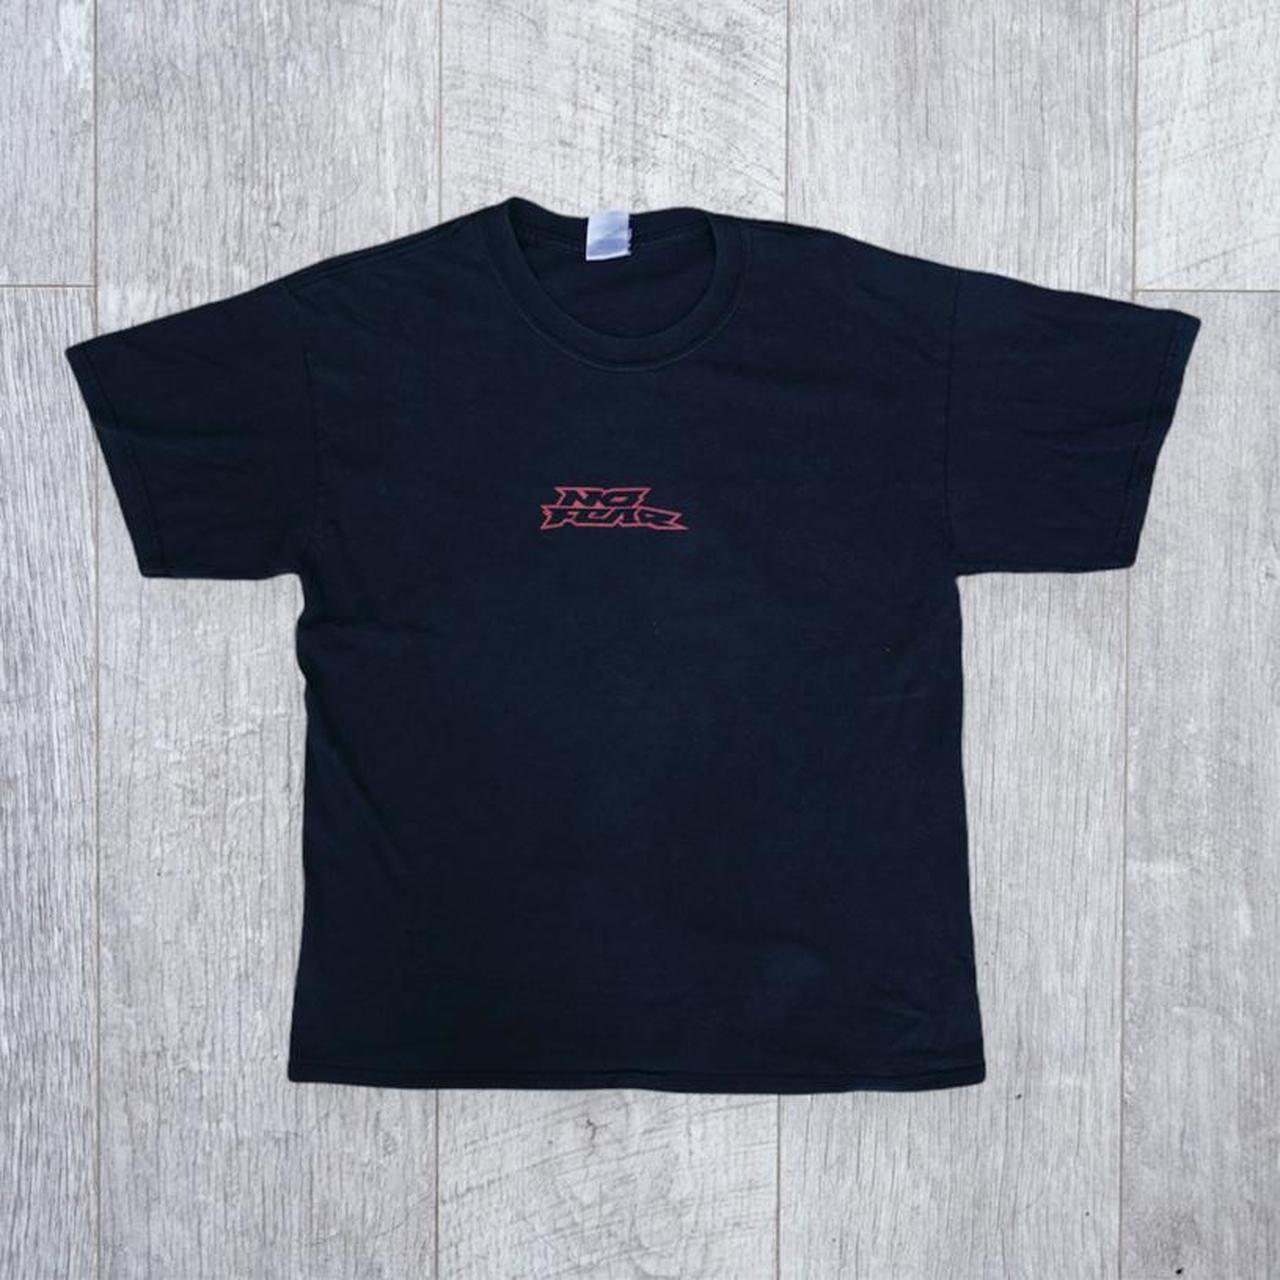 Product Image 2 - Early 2000s Vintage No Fear